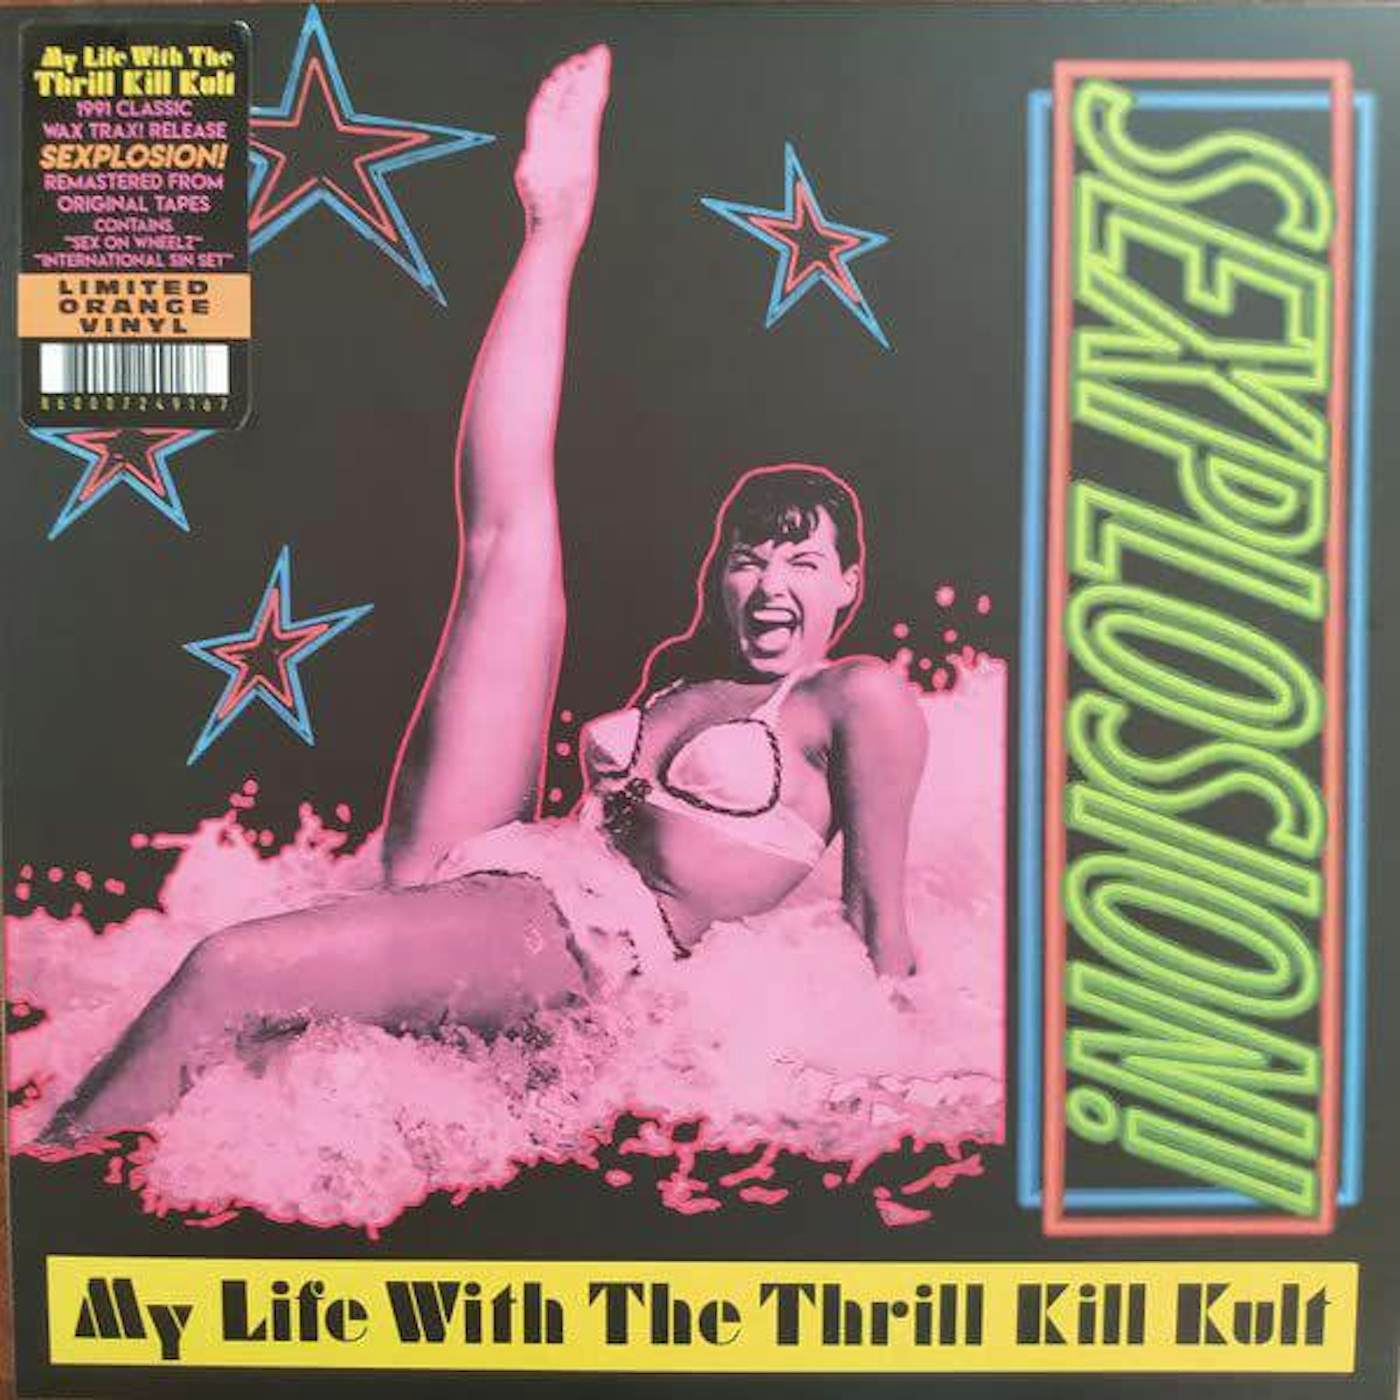 My Life With The Thrill Kill Kult Sexplosion! (Reissue) Vinyl Record